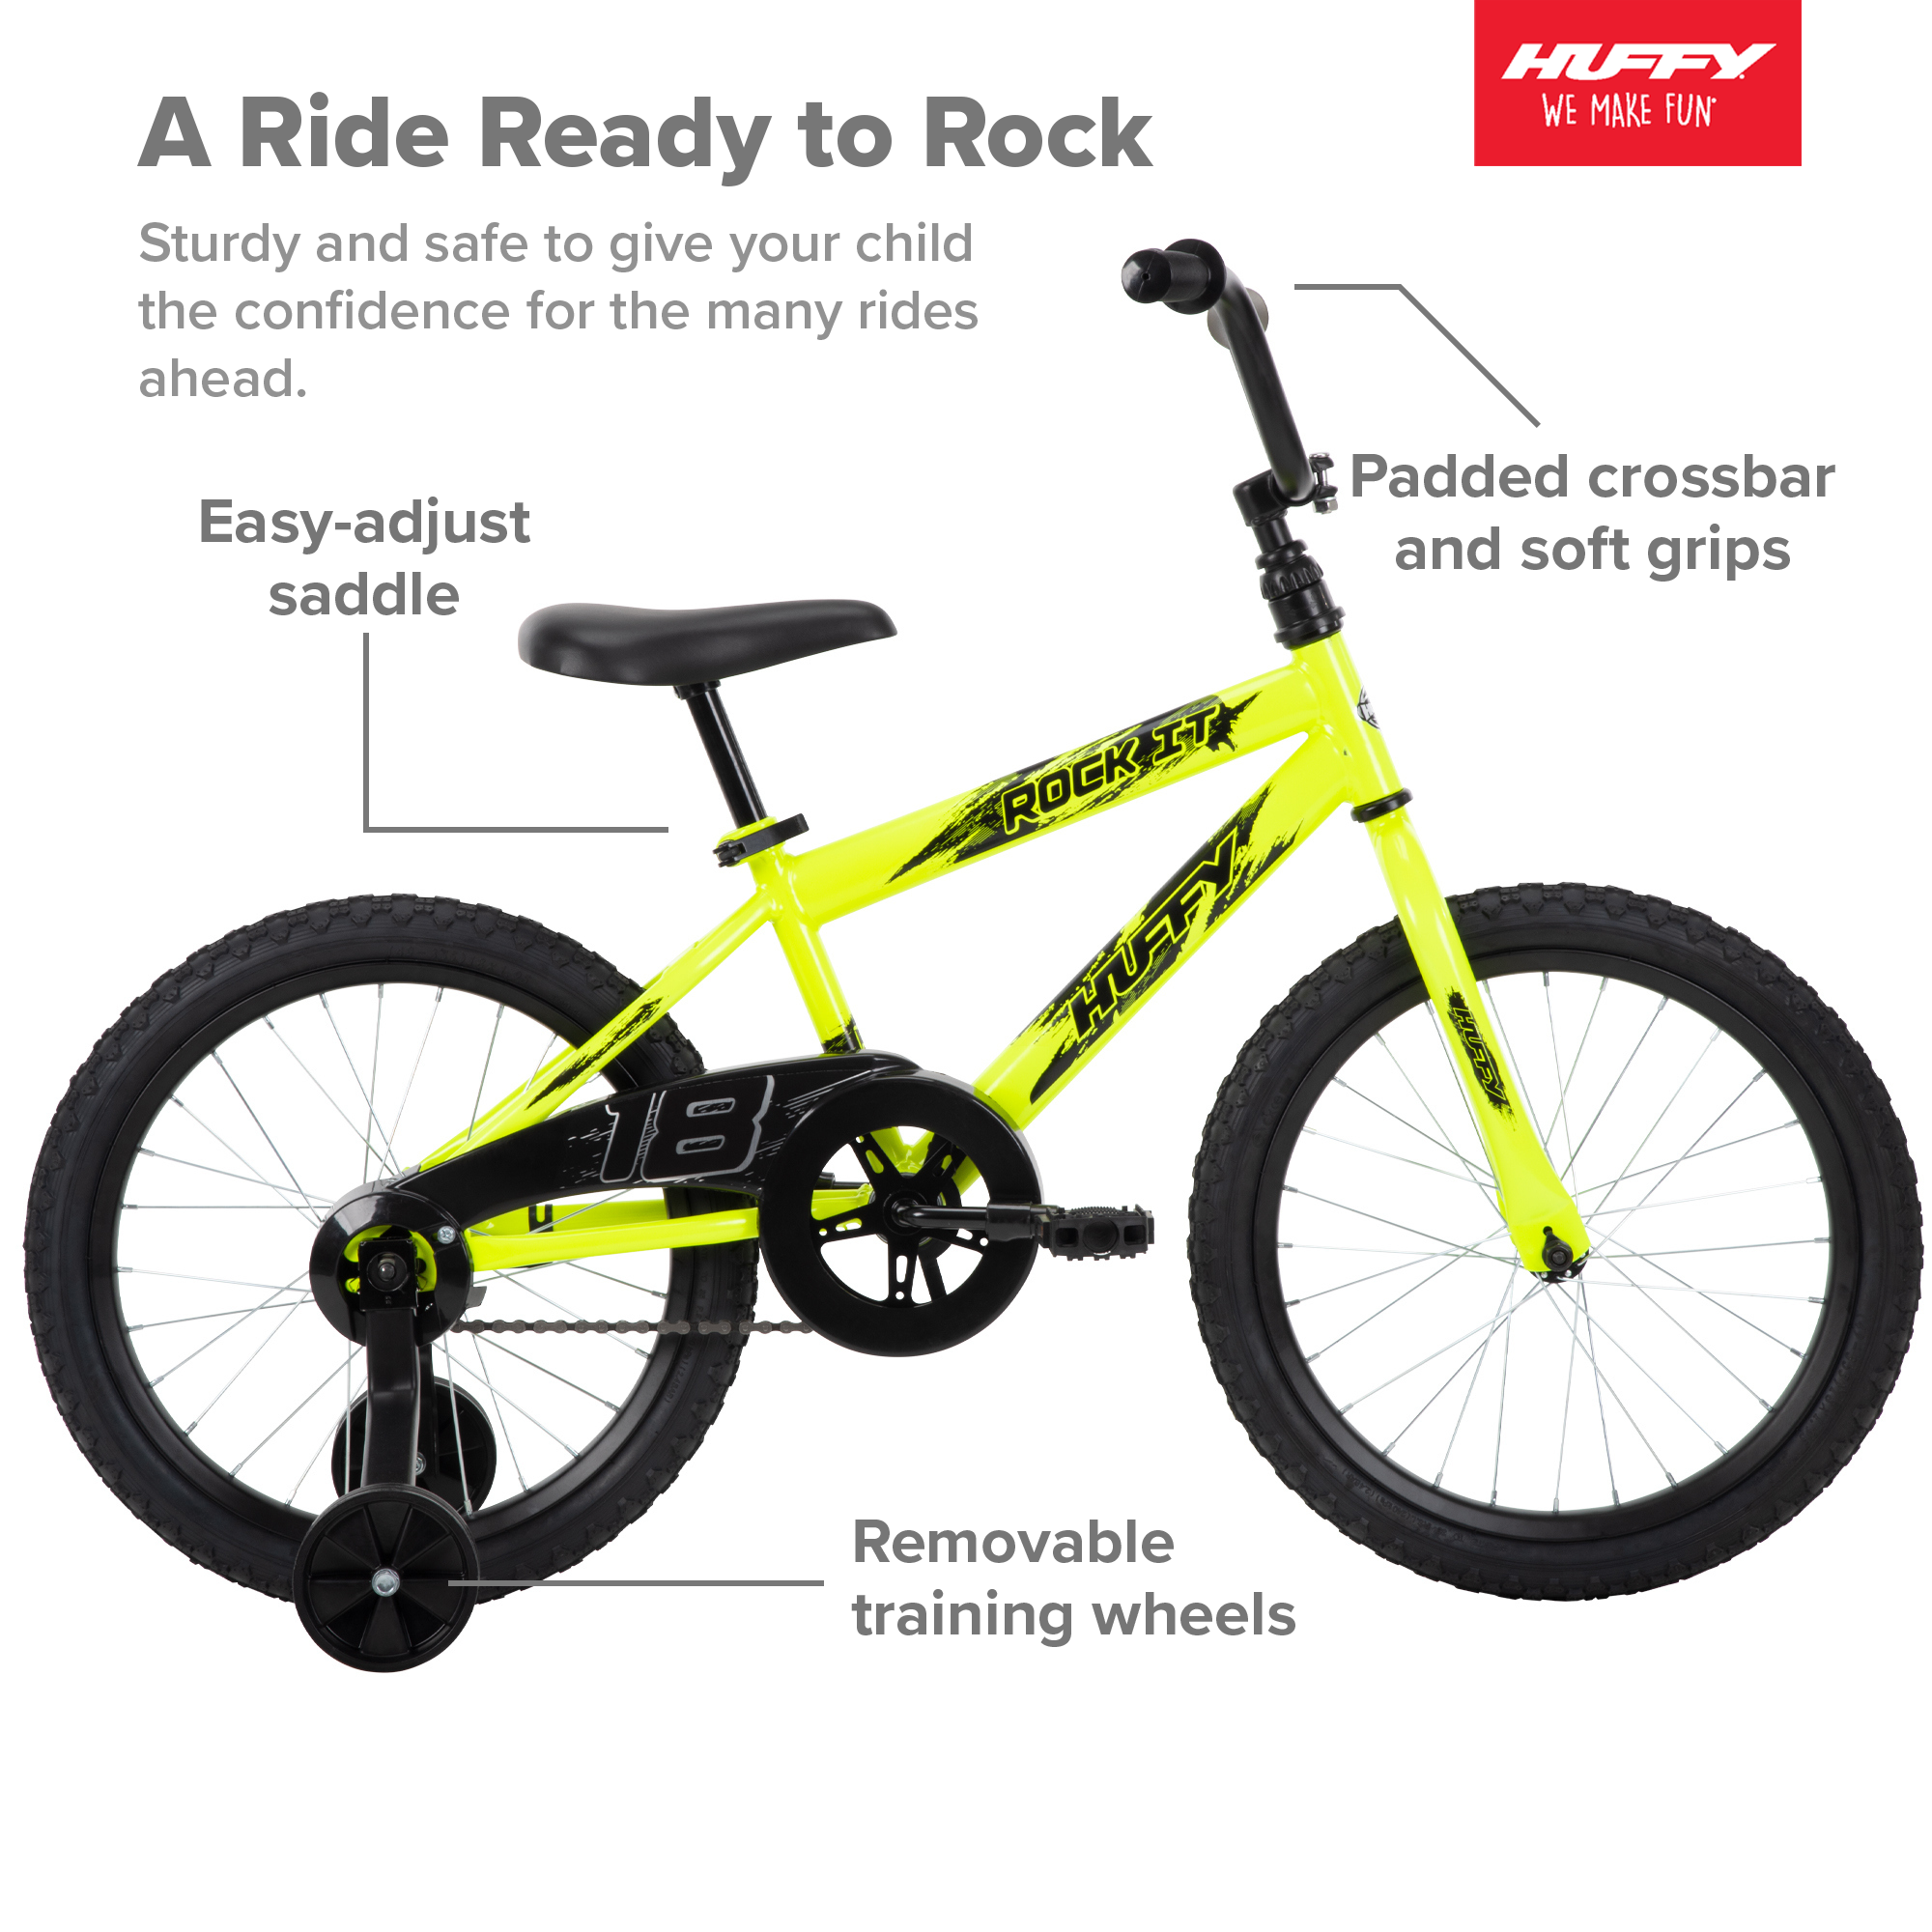 Huffy 18 in. Rock It Kids Bike for Boys Ages 4 and up, Child, Neon Powder Yellow - image 4 of 16